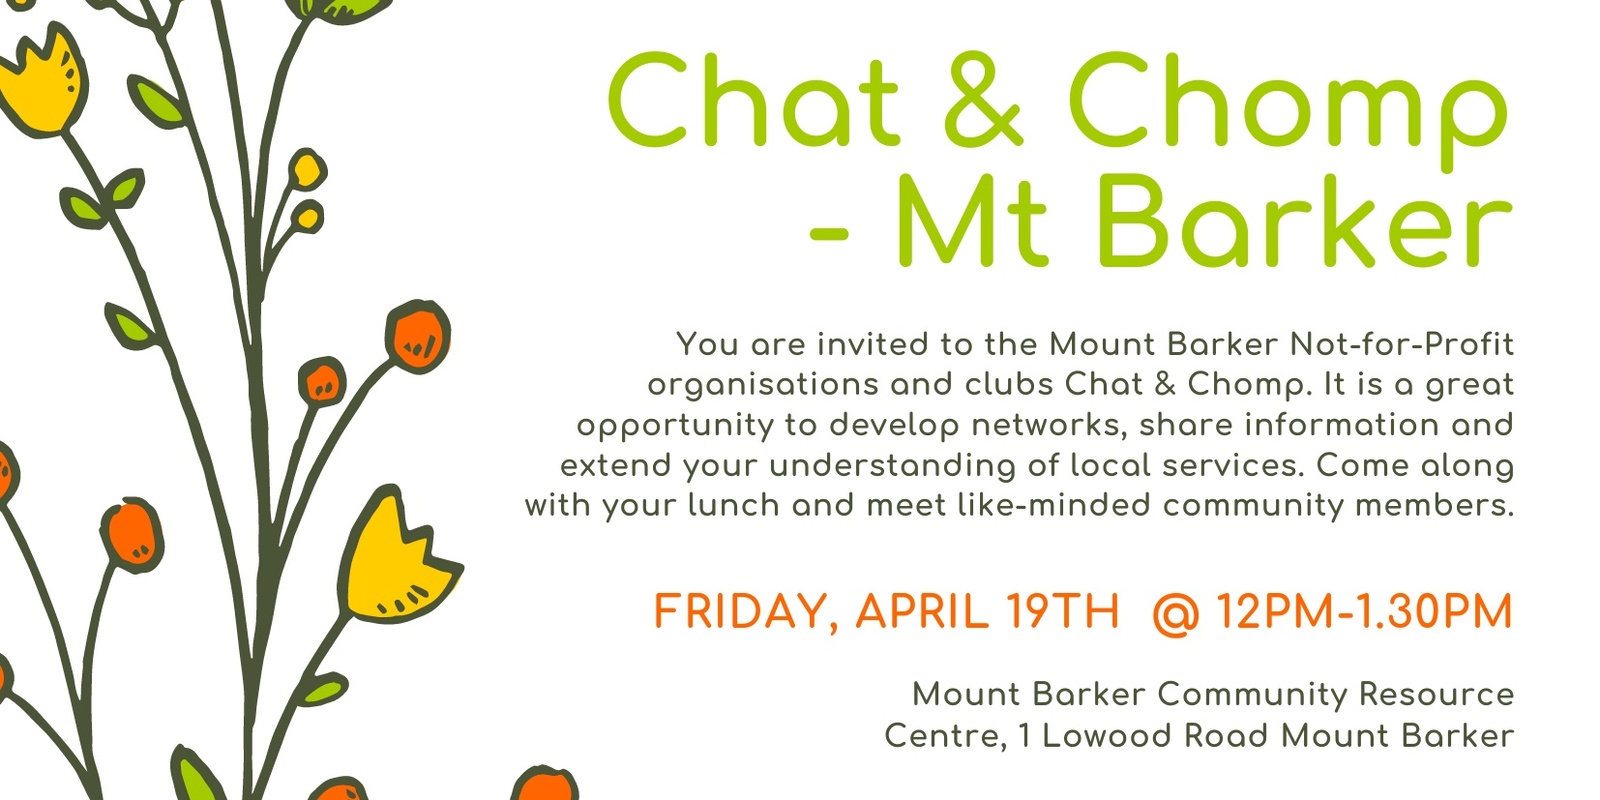 Banner image for Chat and Chomp - Mt Barker